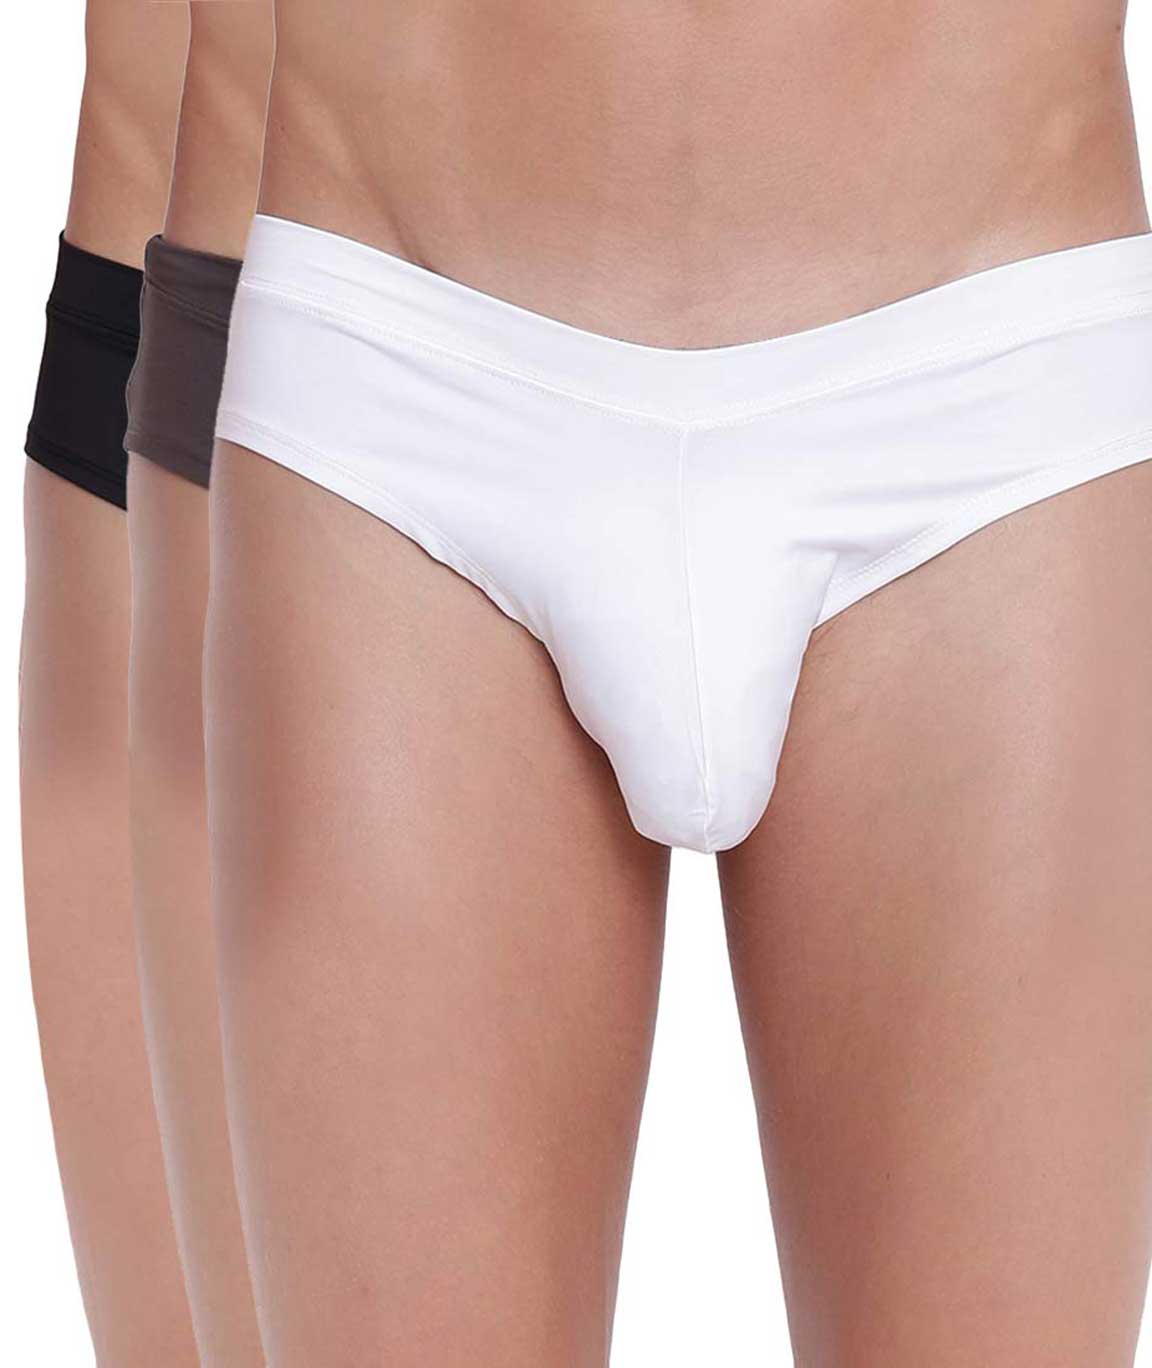 BASIICS Fanboy Style Brief by La Intimo (Pack of 3)